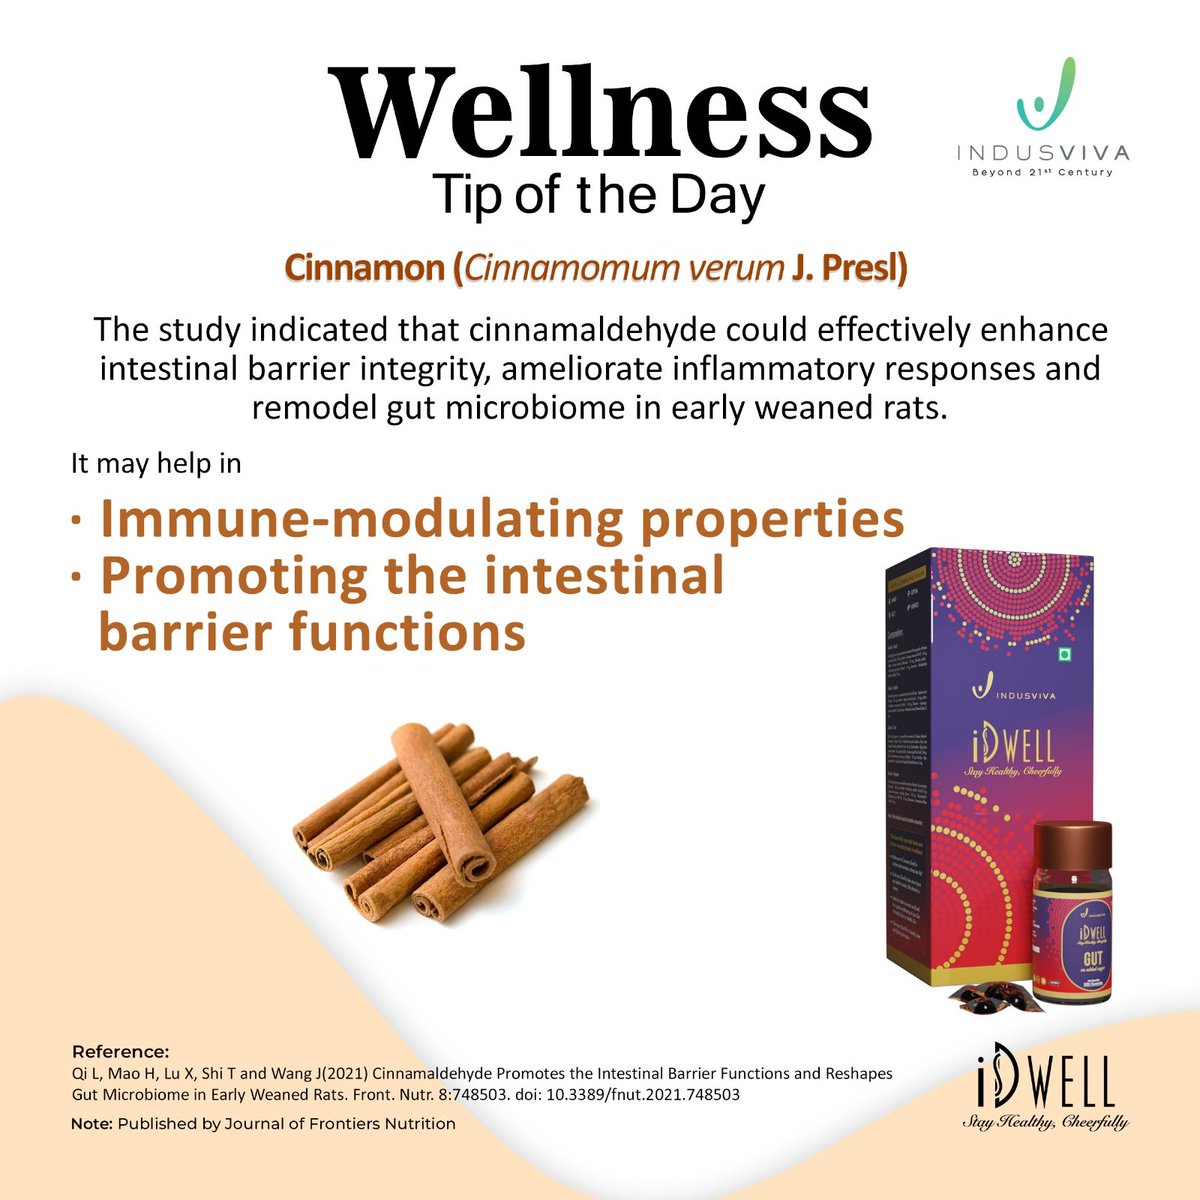 Experience digestive wellness with iDwell Gut Gummies, enriched with the natural goodness of cinnamon.
website : vivaidwell.com
#wellness #gummies #health #Ayurveda #Gut_health #Gut #immunity #antioxidants
#Gut_Gummies #tasty_gummies #vivaidwell #indusviva #vibrantviva